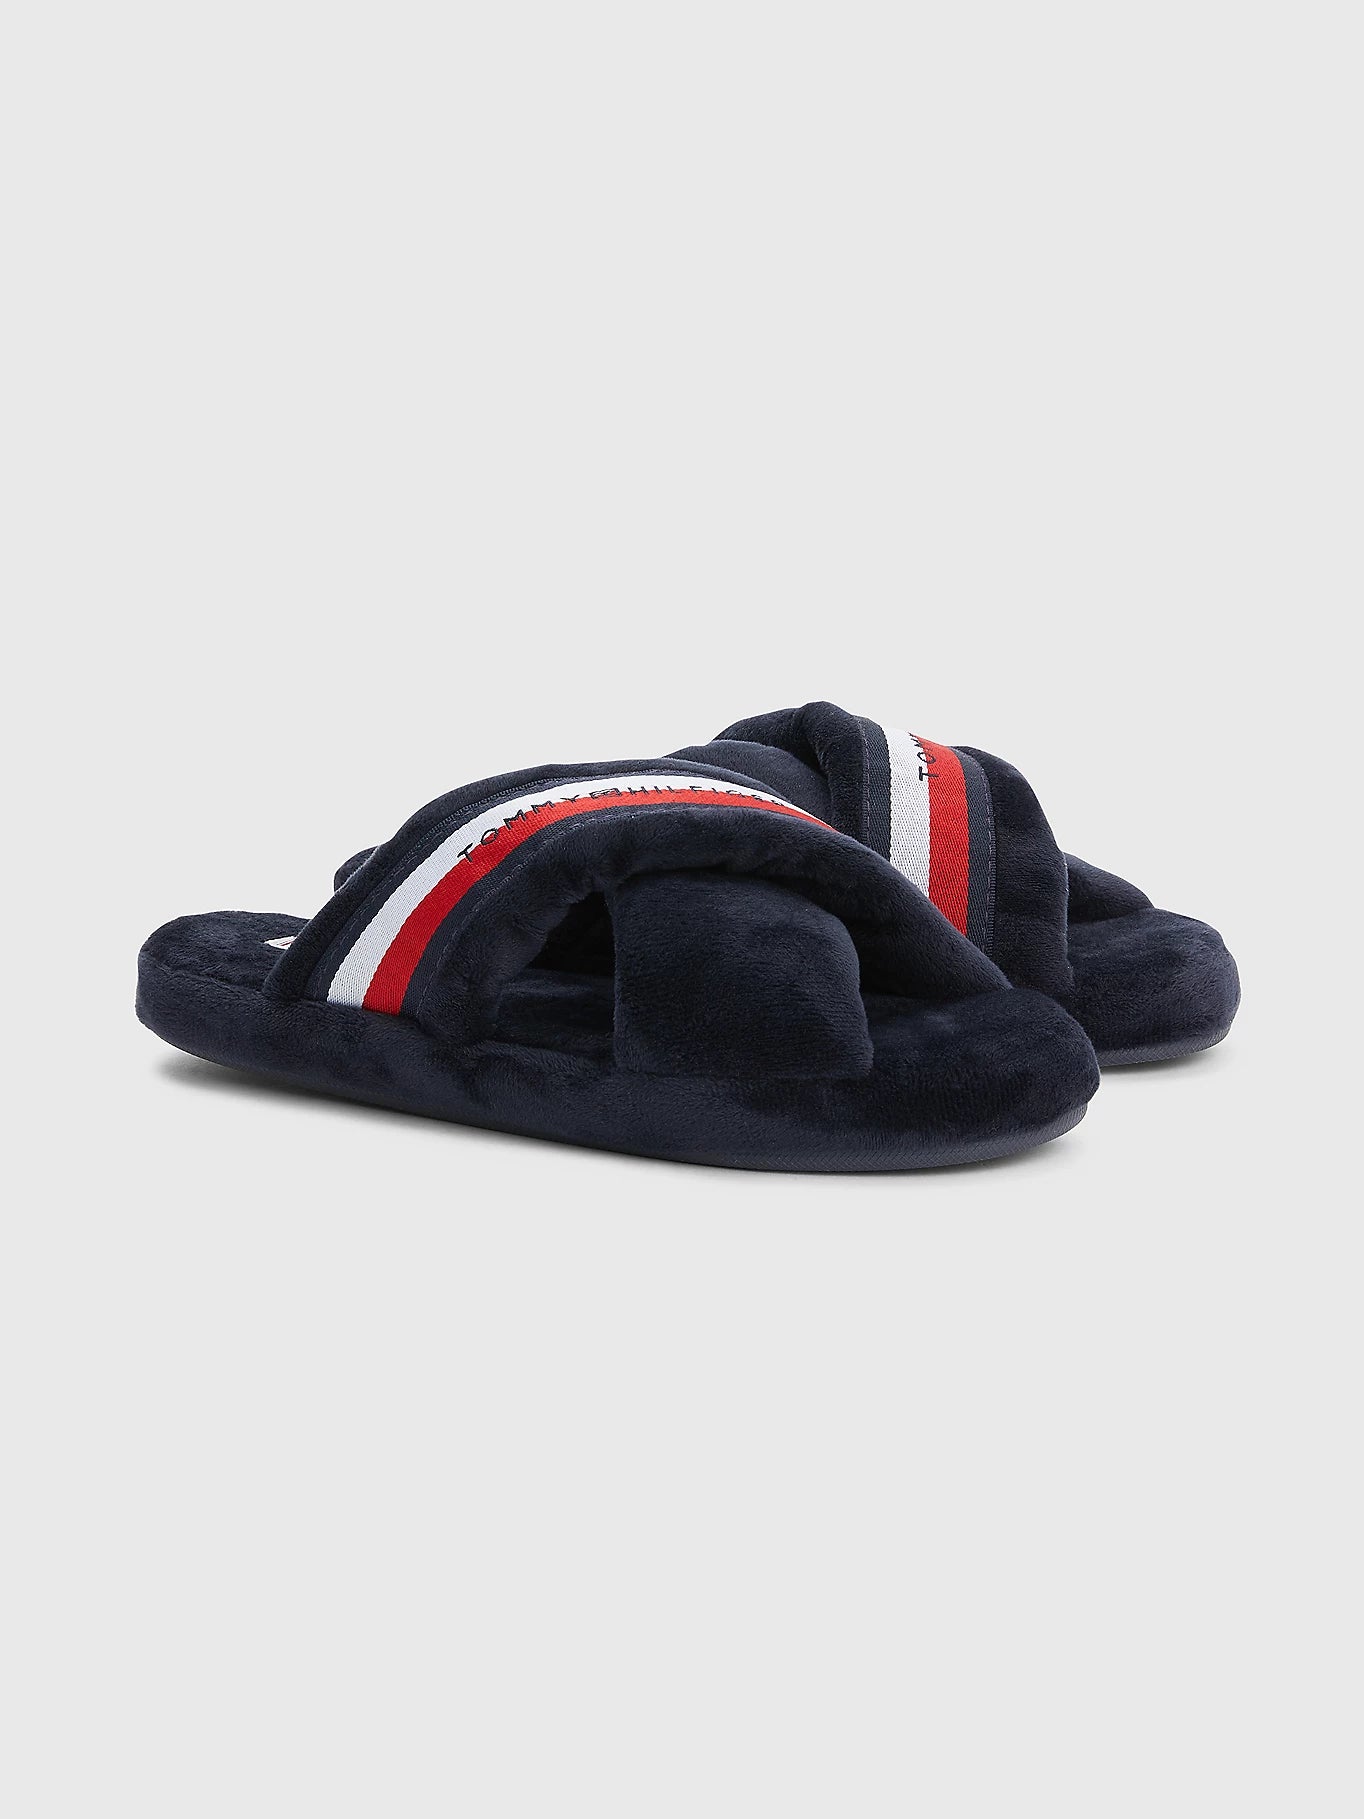 Tommy Hilfiger Comfy Slippers Navy